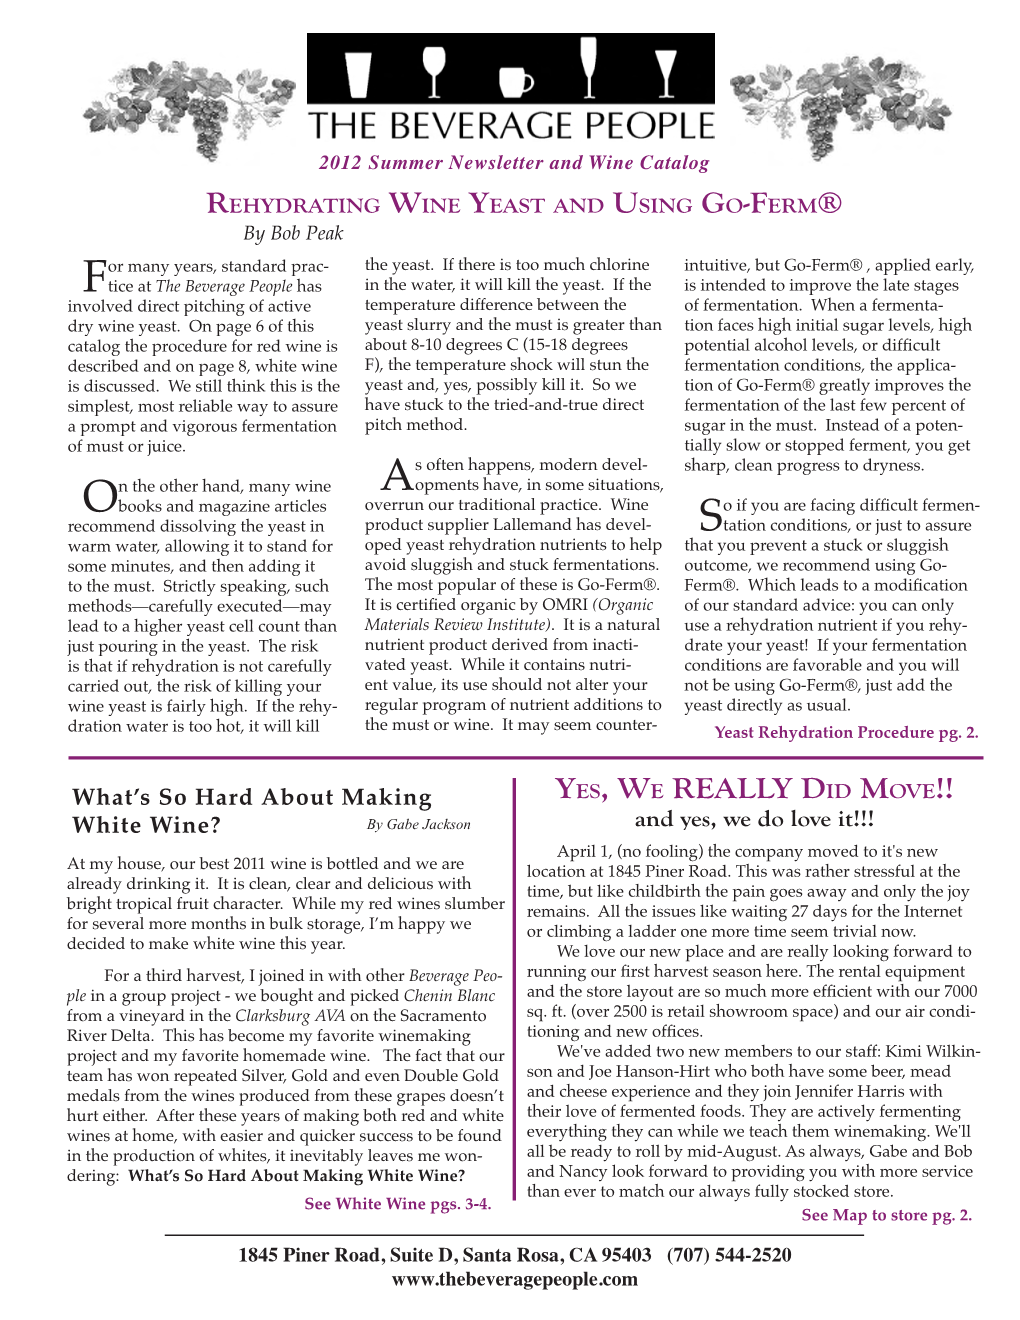 2012 Wine Newsletter and Catalog